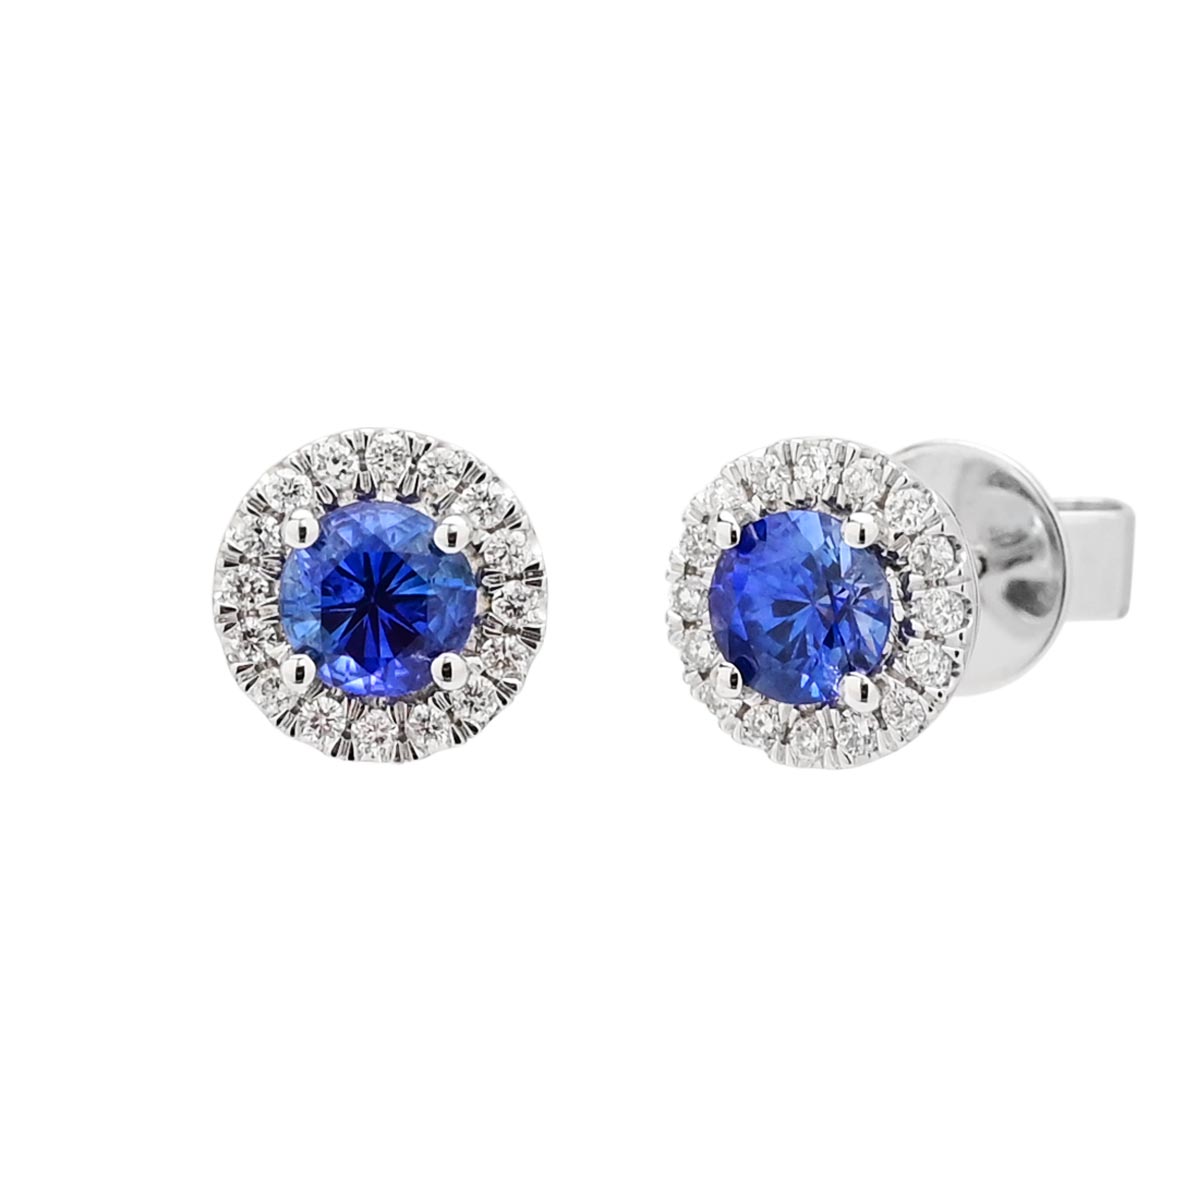 Martin Flyer Sapphire Halo Stud Earrings in 14kt White Gold with Diamonds (1/7ct tw)